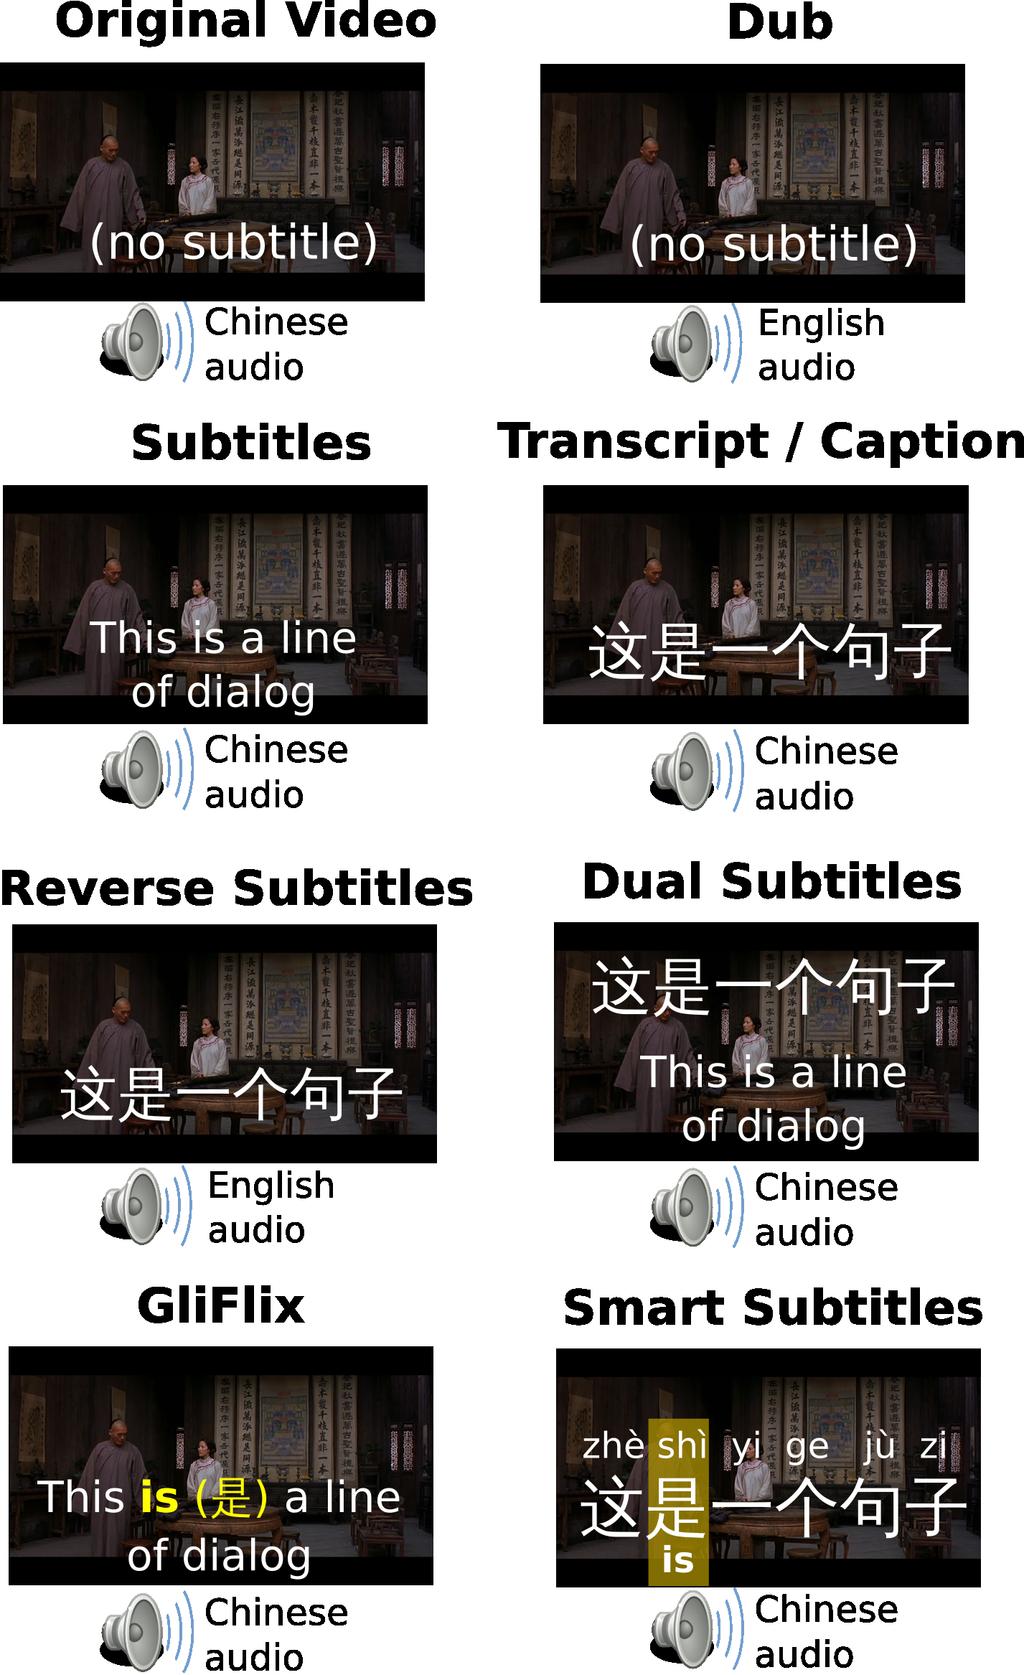 Smart Subtitles can be automatically generated from a number of video sources, such as DVDs.